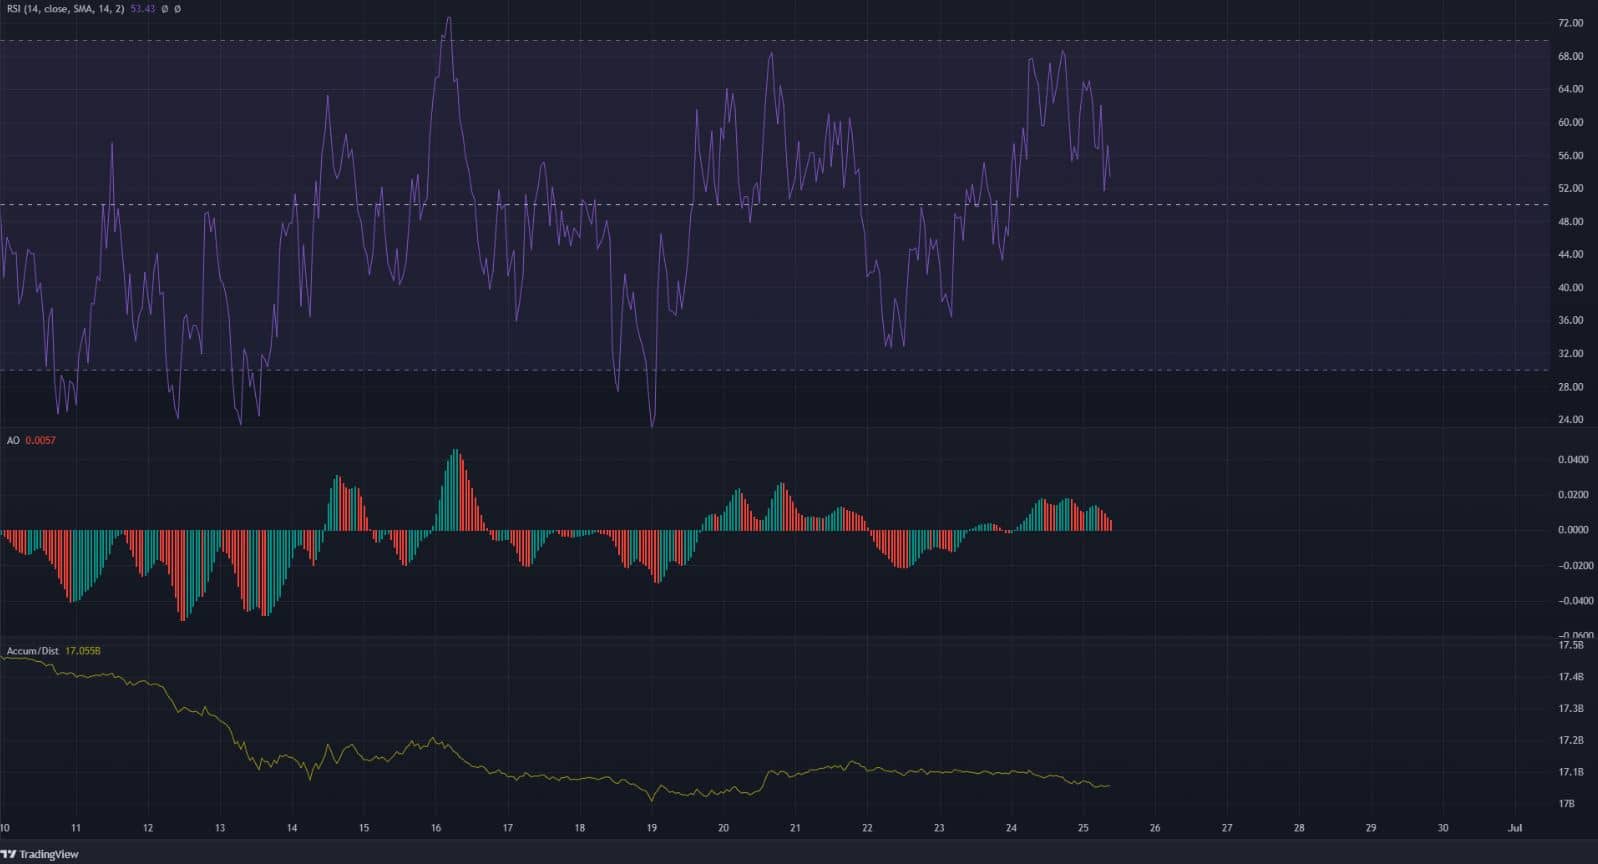 Cardano forms a triangle pattern after a bounce from range lows, can further gains be attained?